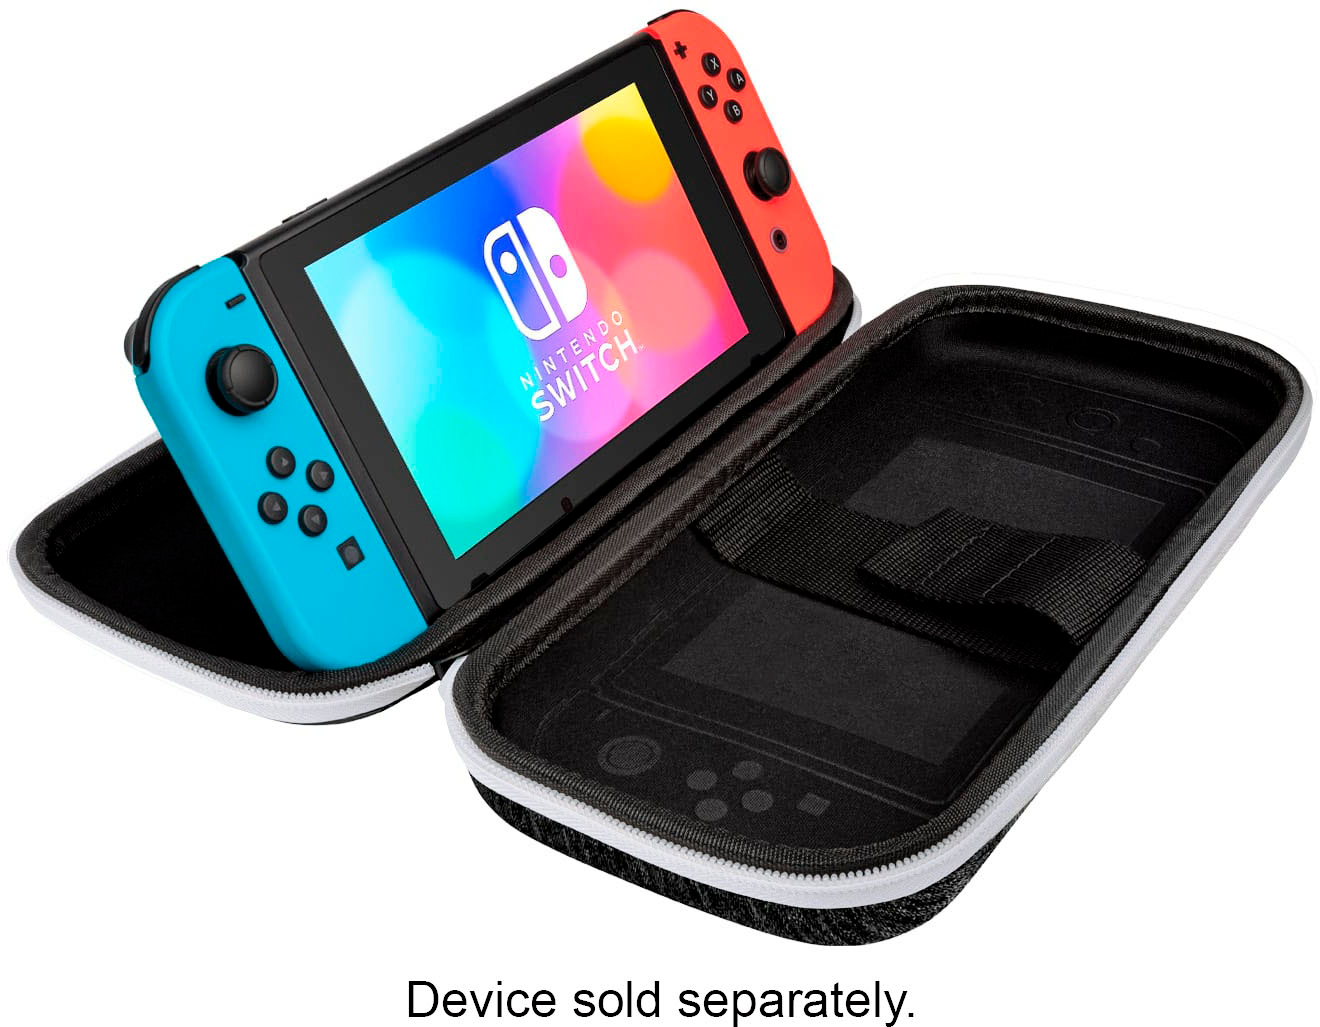 How Much Is A Nintendo Switch?